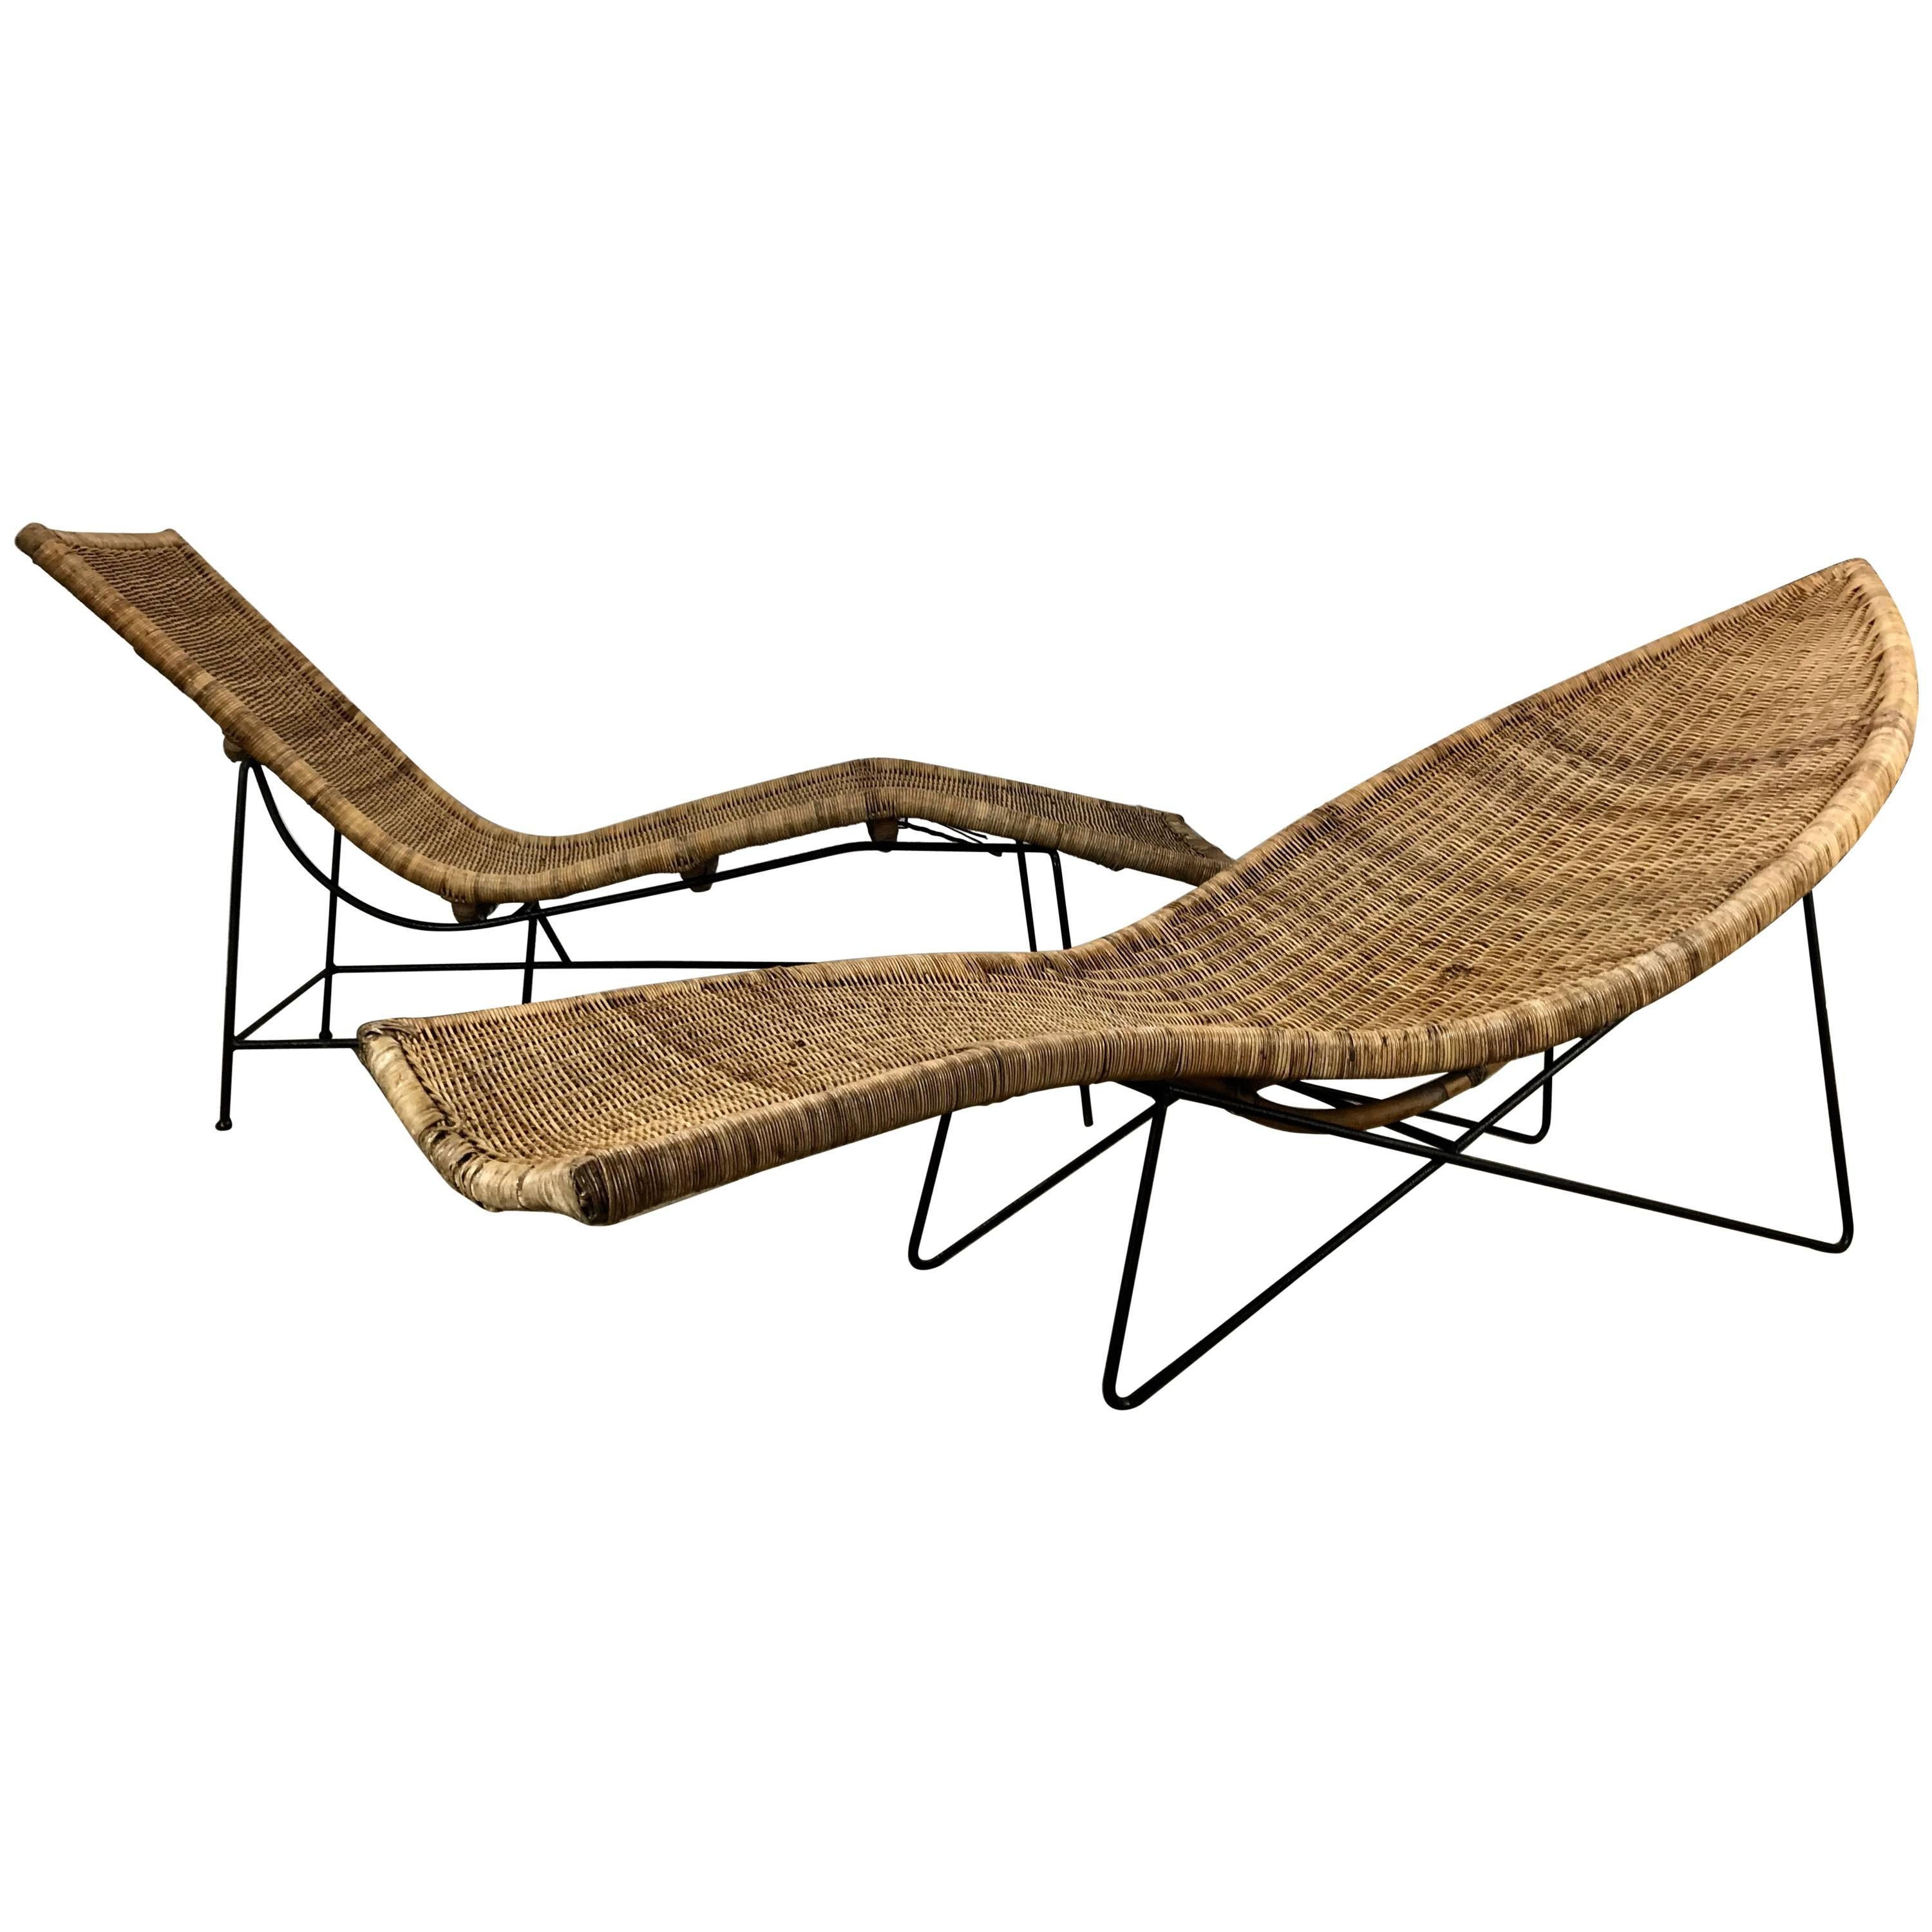 Classic Modernist Pair of John Salterini Wicker and Iron "Fish" Chaise Lounges